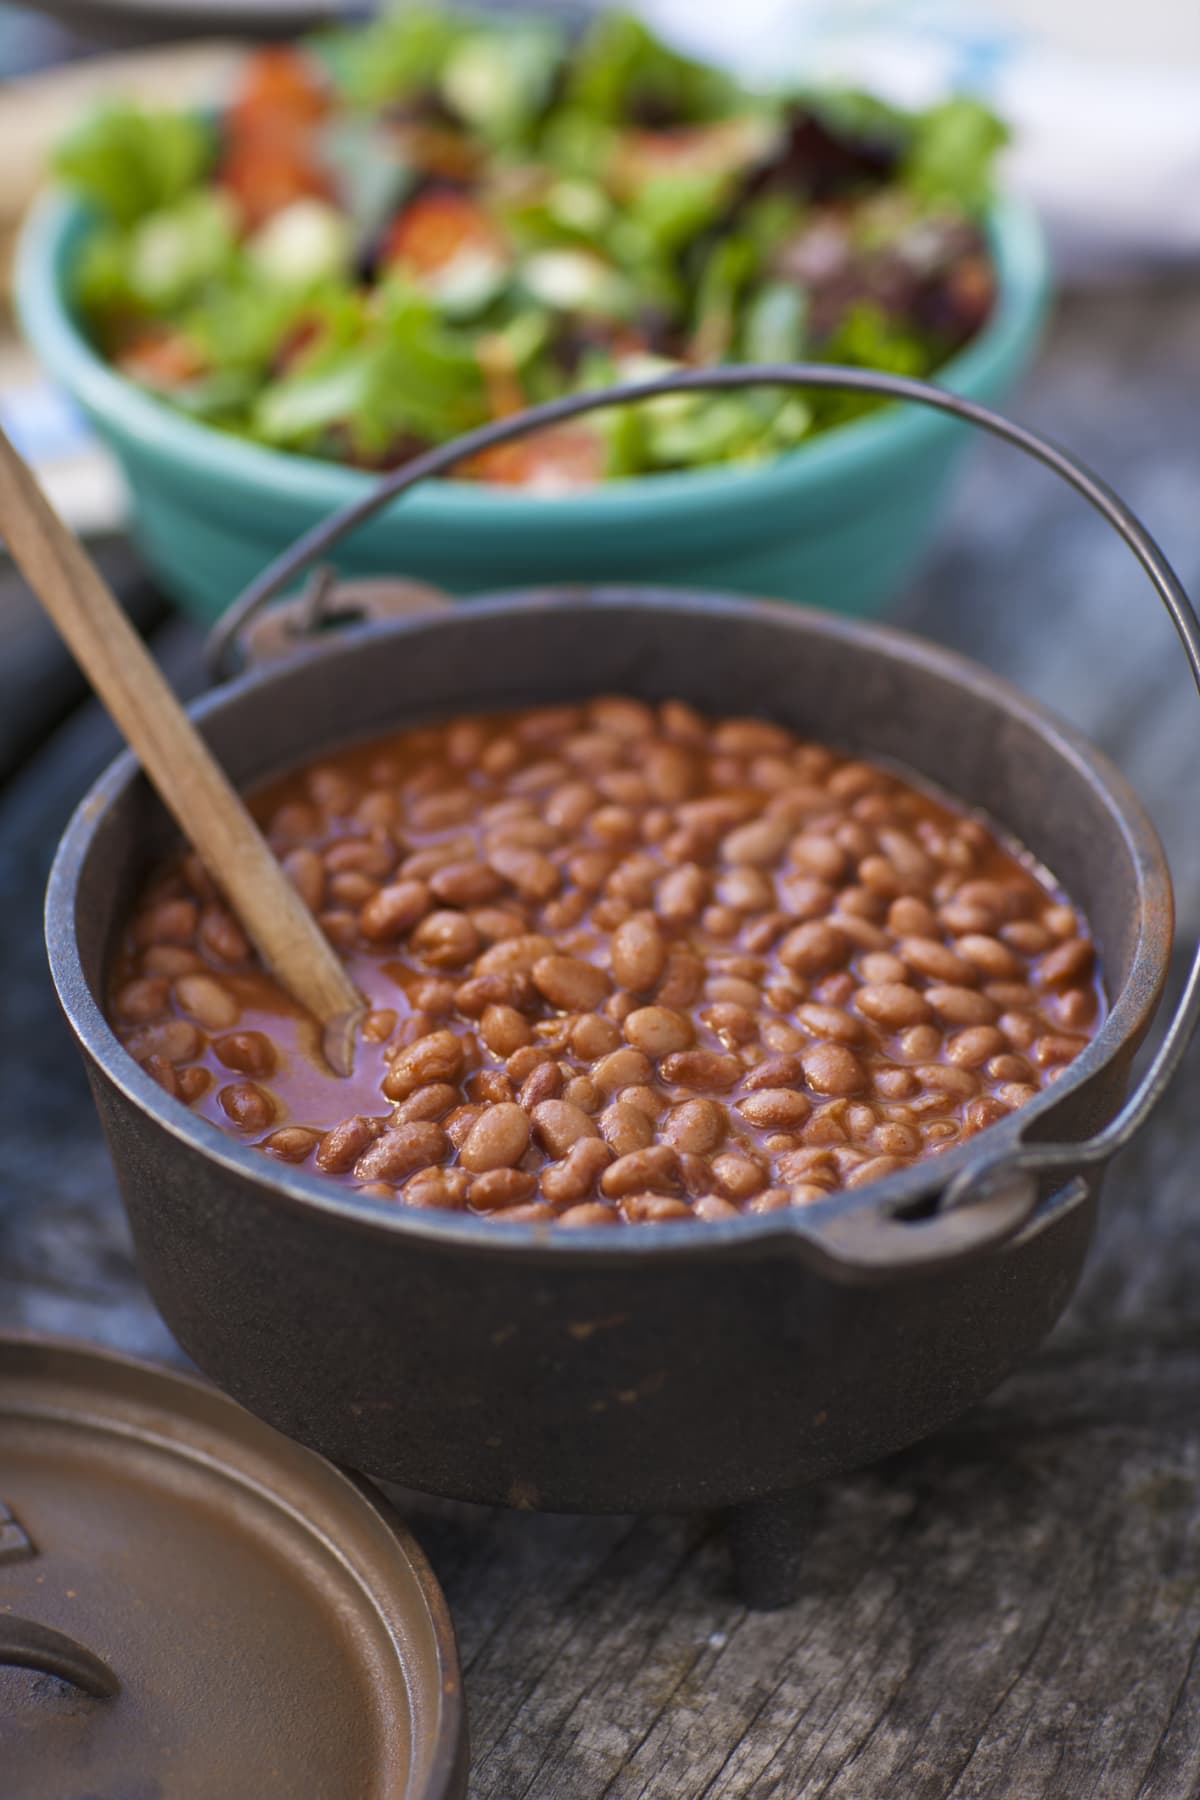 Baked beans in a dark pot with a wooden utensil